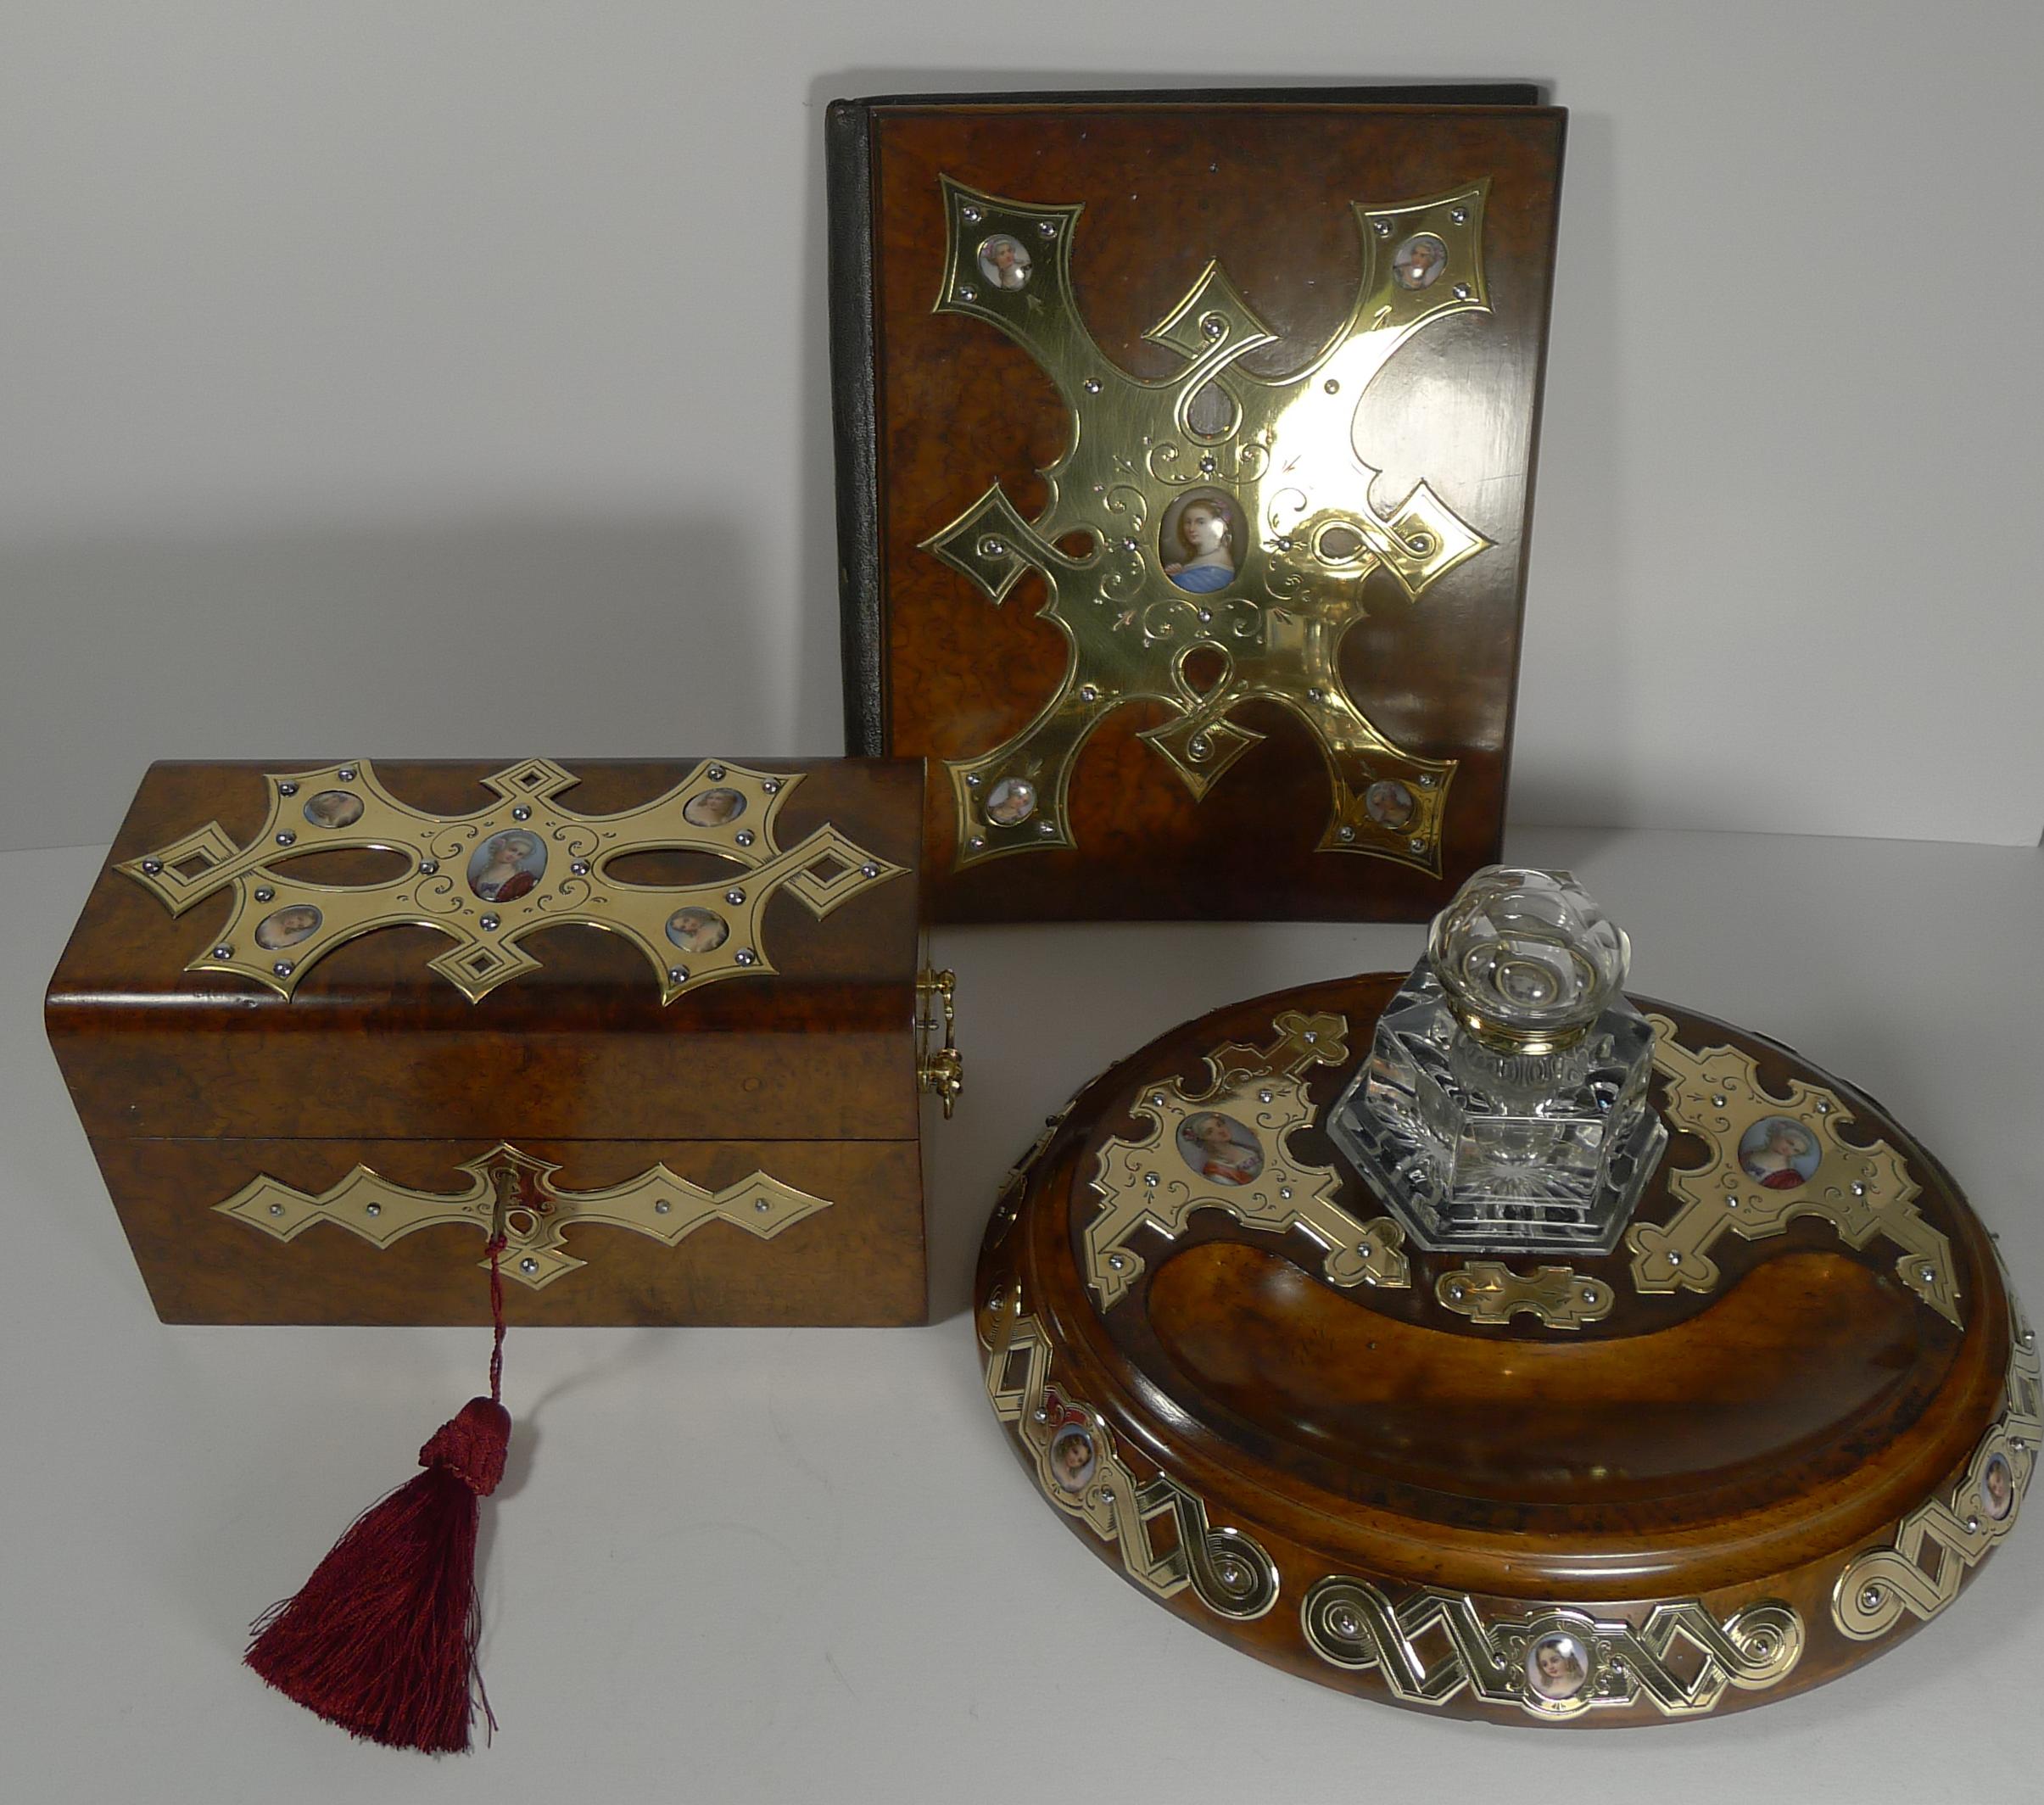 Wonderful to find a top-notch, highly decorative and most unusual desk set, French in origin dating to around 1860. Made from nutty coloured burl Walnut, all three pieces are mounted with the most wonderful polished brass mounts all inset with